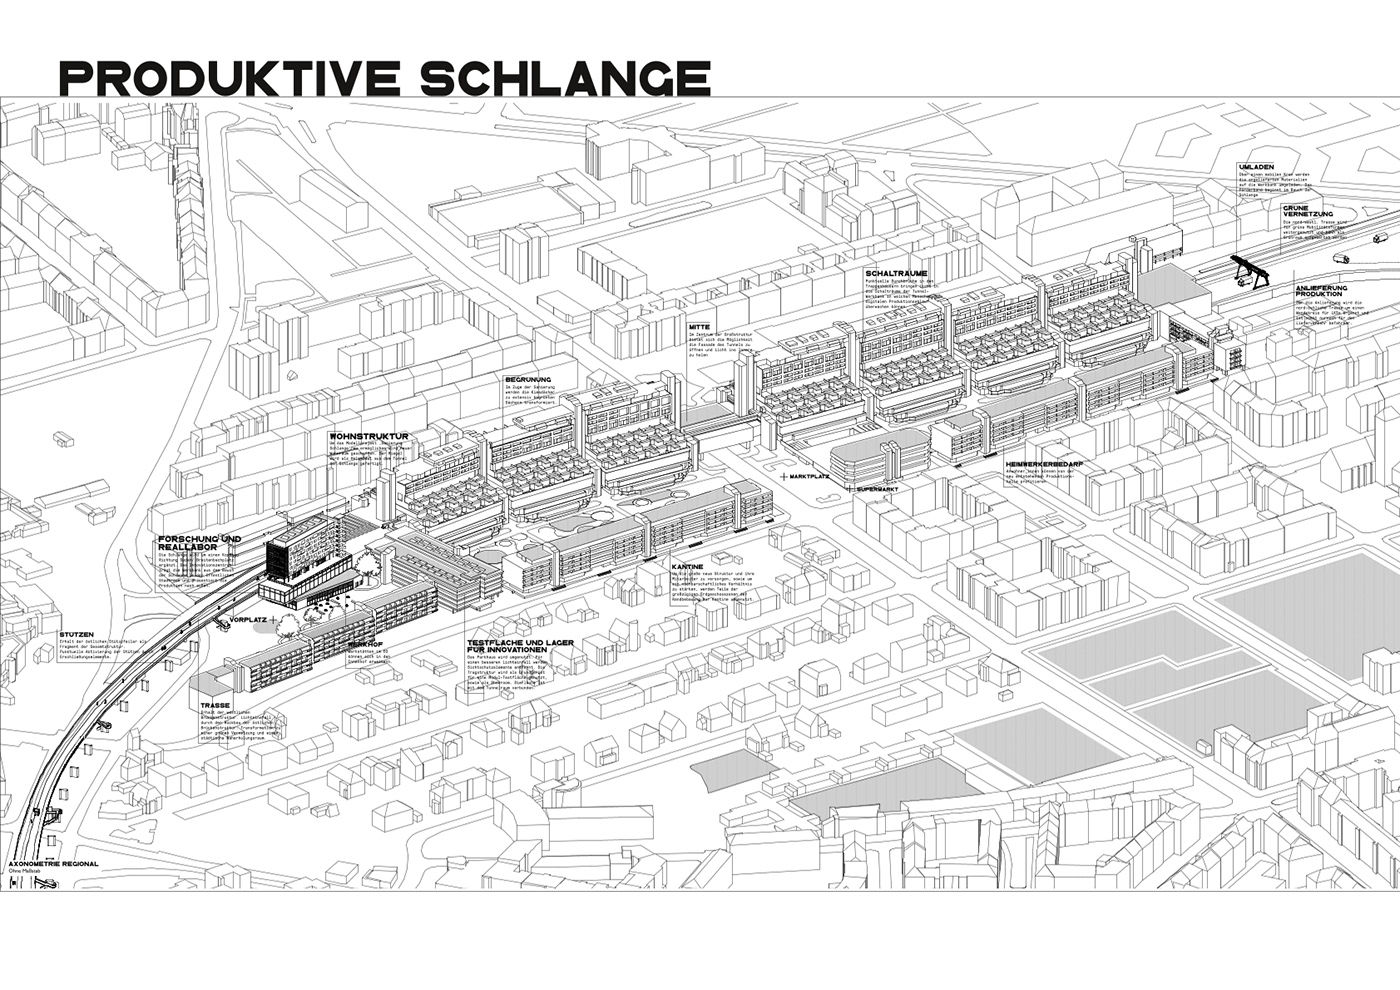 berlin urbandesign Production architecture Productivecities